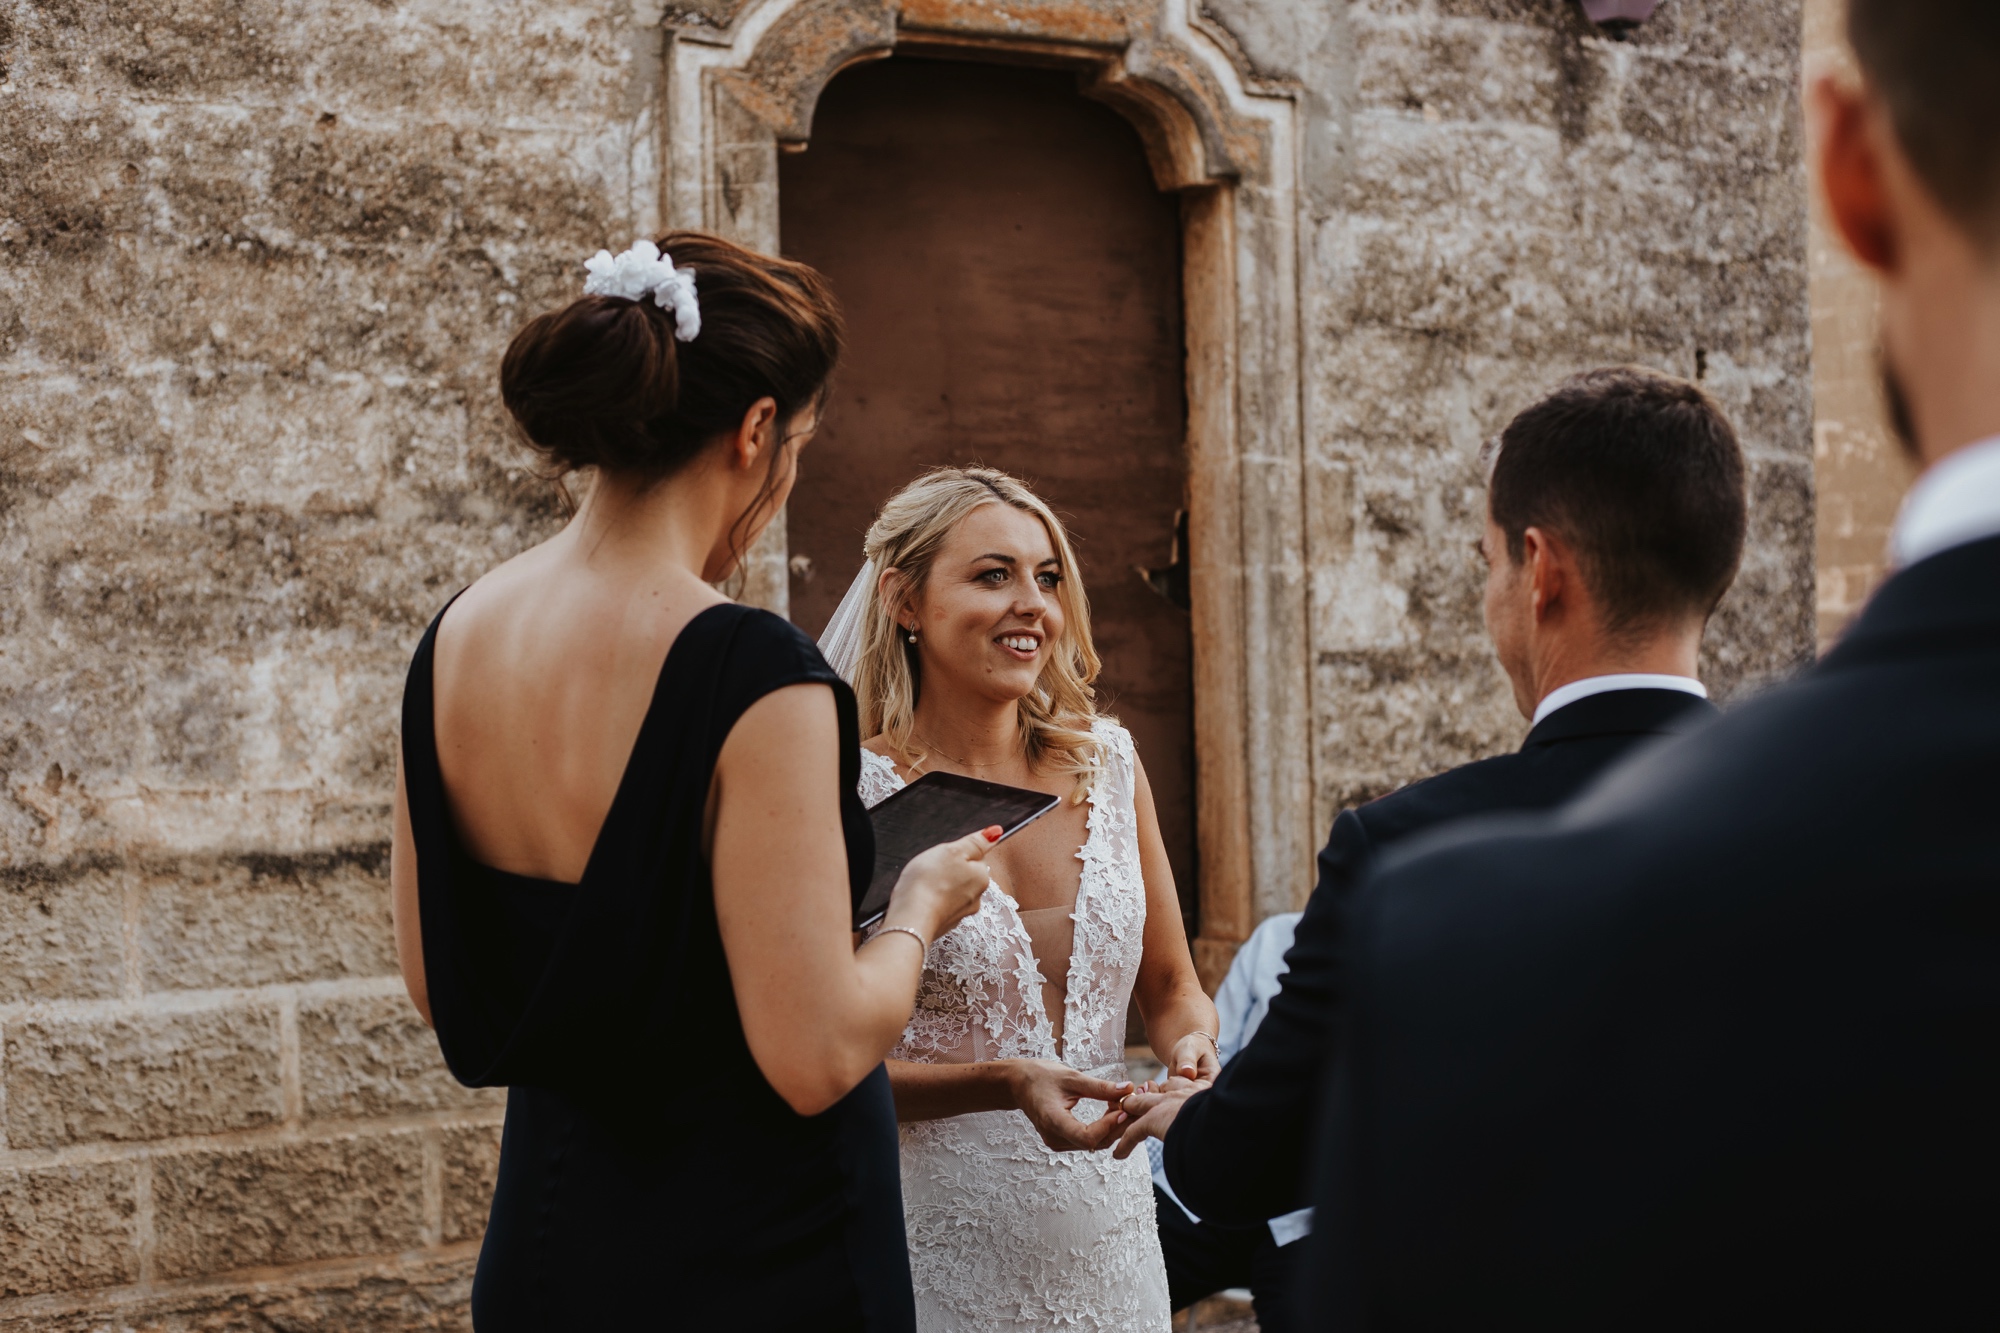 0000000041_Rob and Lucy-383_Weddings_Destination_Italy_got_Just_Engaged.jpg